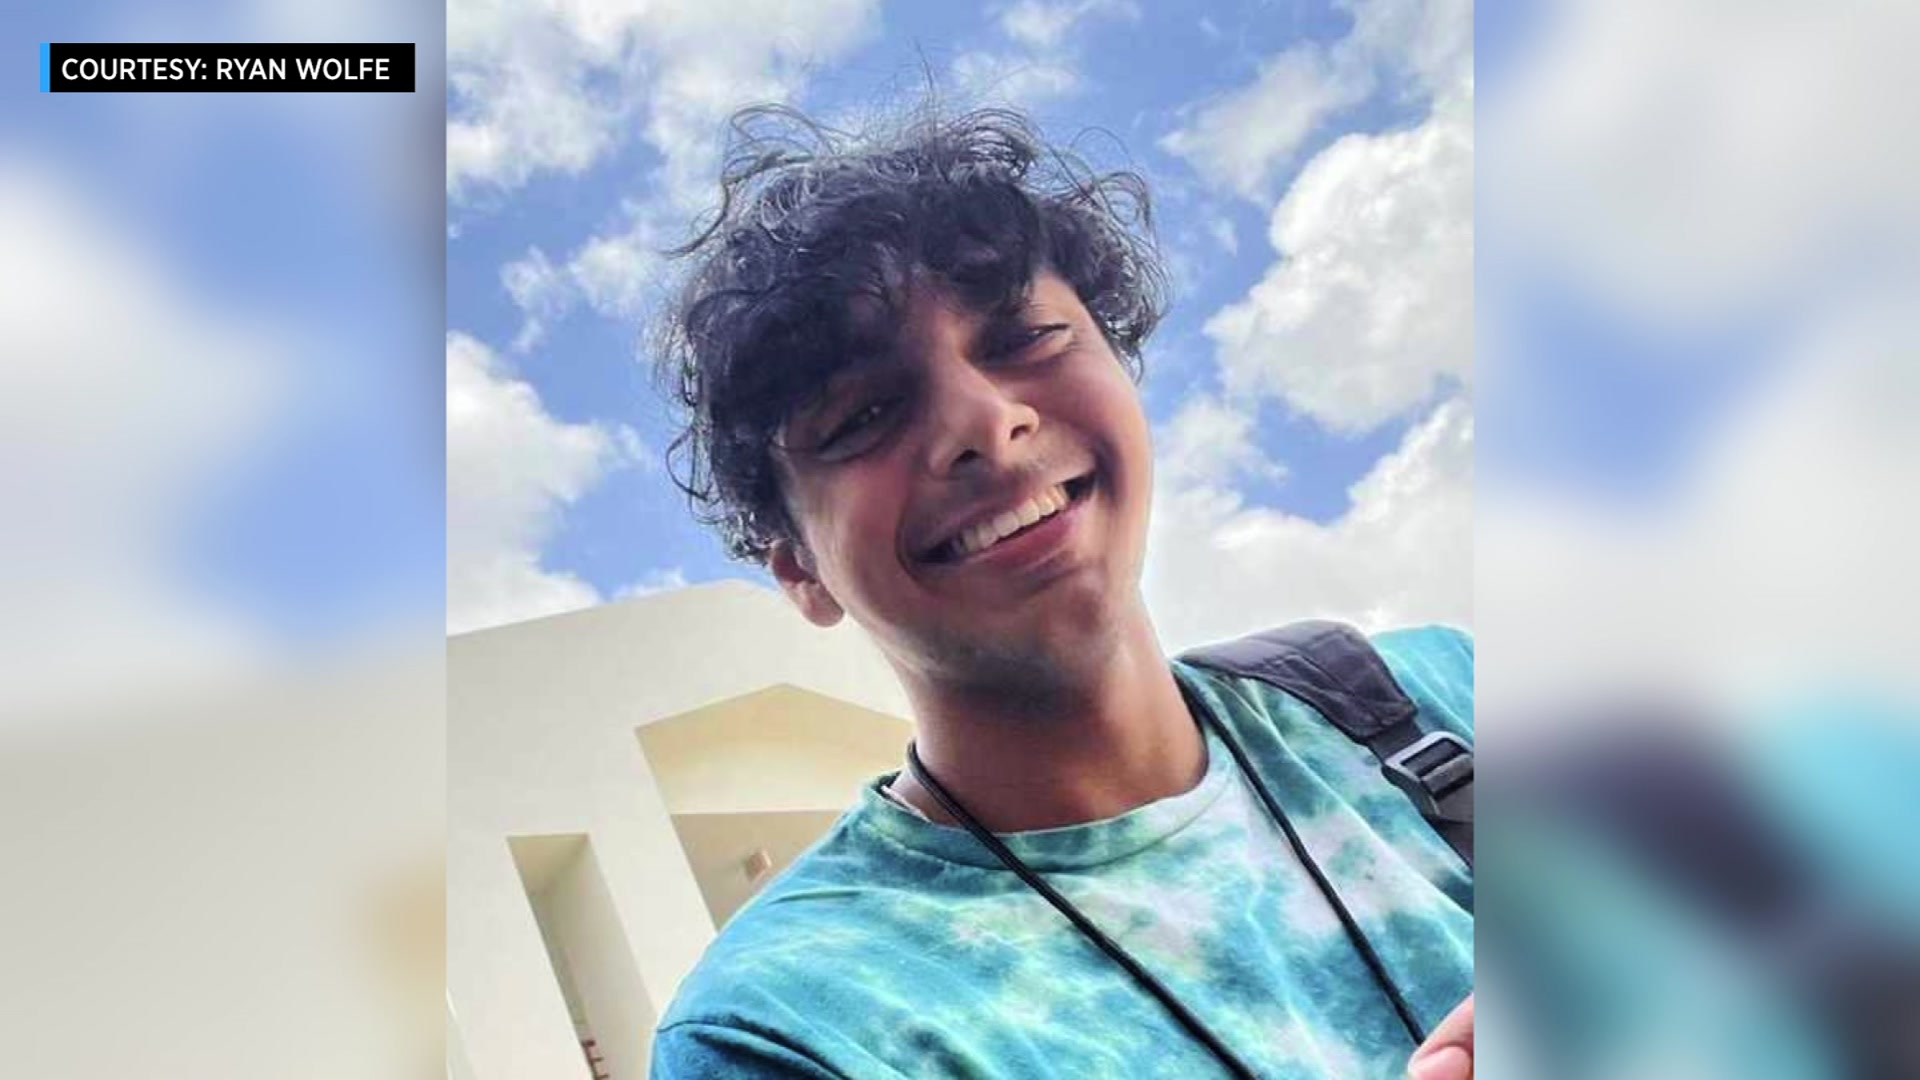 ‘He Brought Joy Everywhere’: Family, Friends Remember Teen Who Died When Car Plunged Into Sunrise Lake